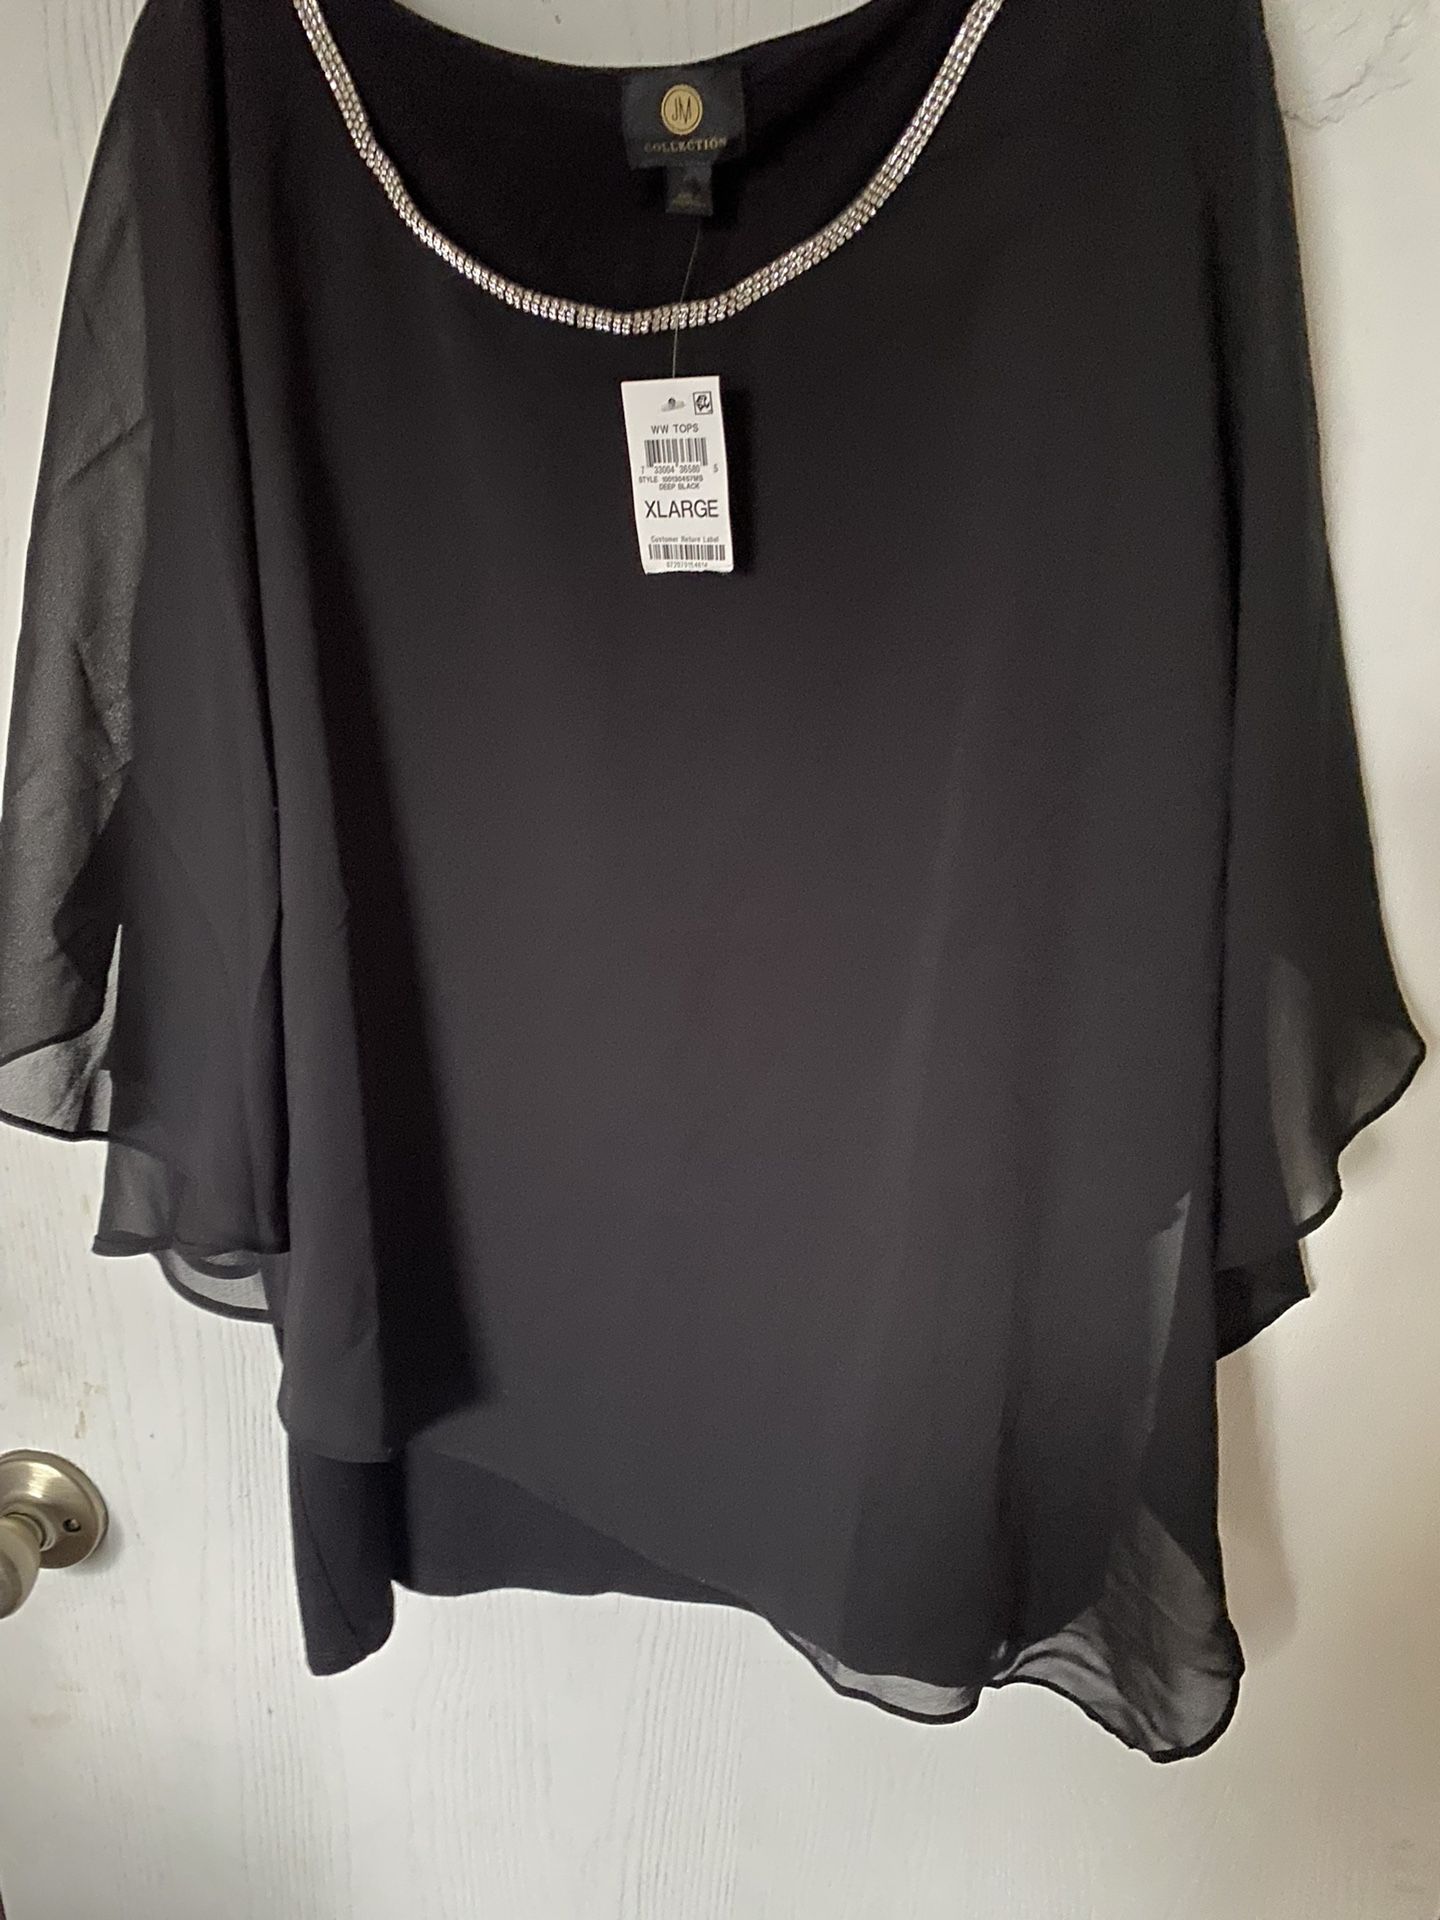 Blouses Bundle for Sale in Seattle, WA - OfferUp